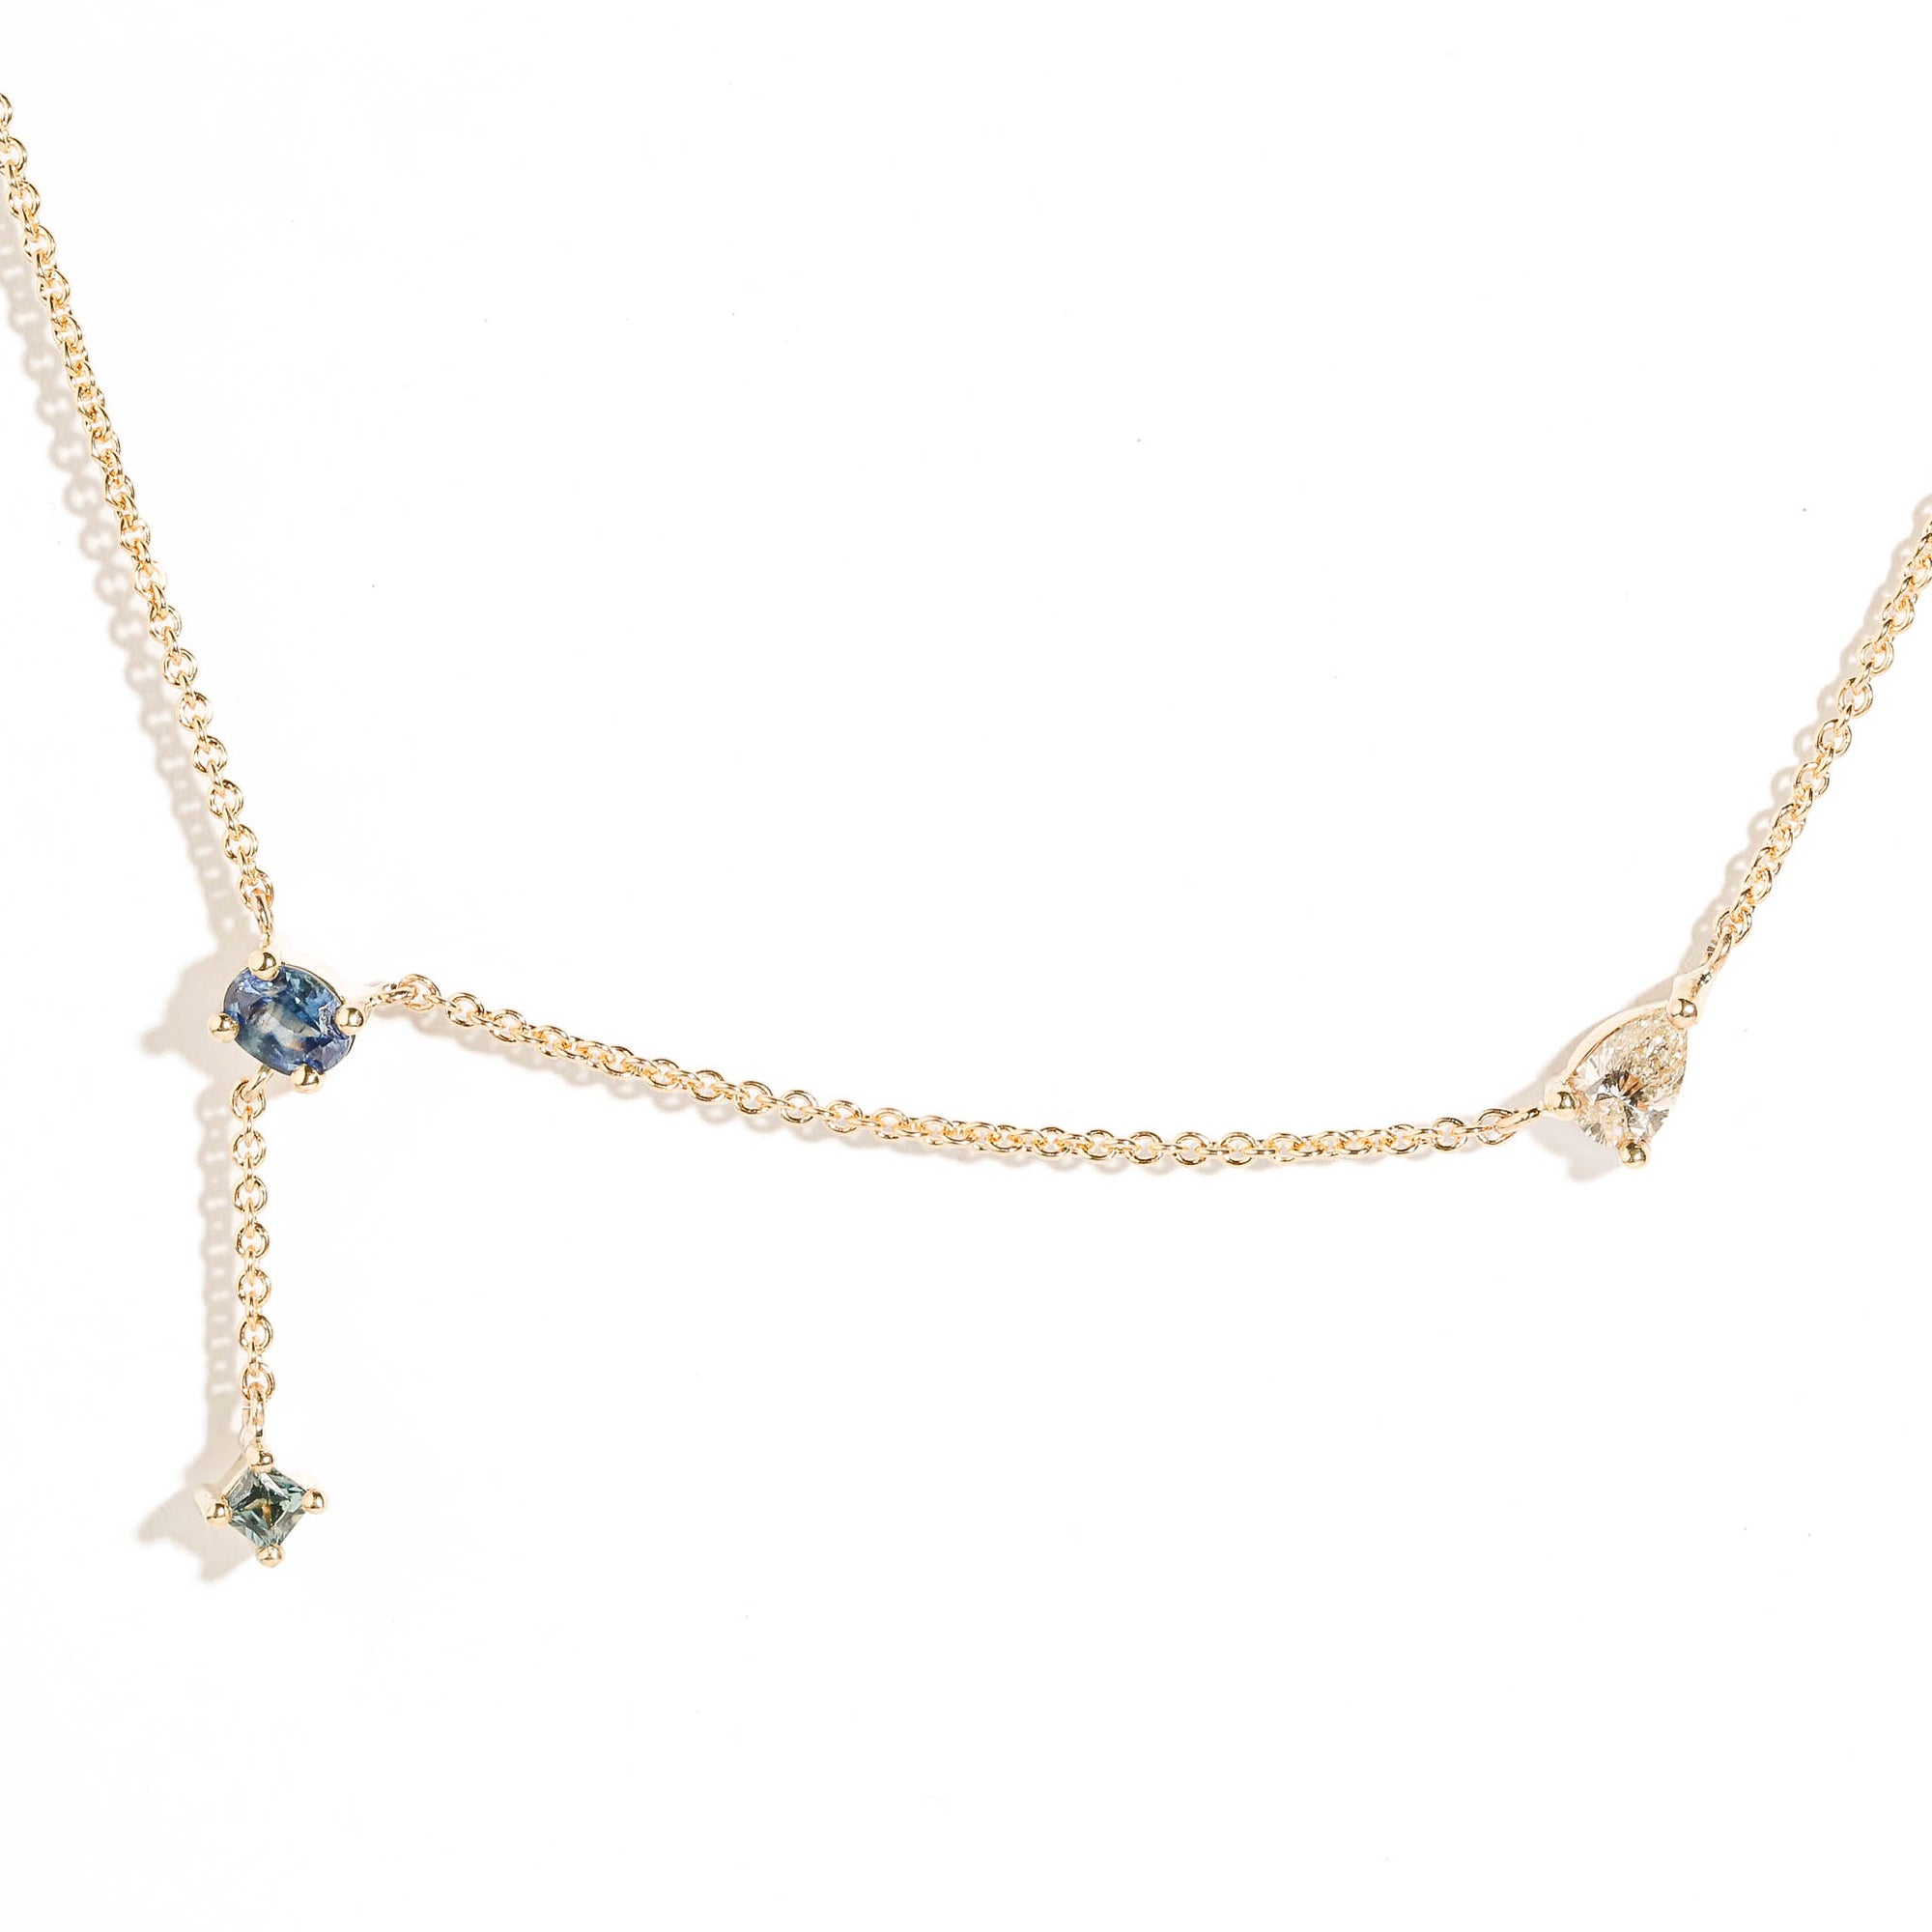 Three Stone Oval Cut Blue Sapphire, Princess Cut Green Sapphire and Pear Cut Diamond Necklace in 9 Carat Yellow Gold